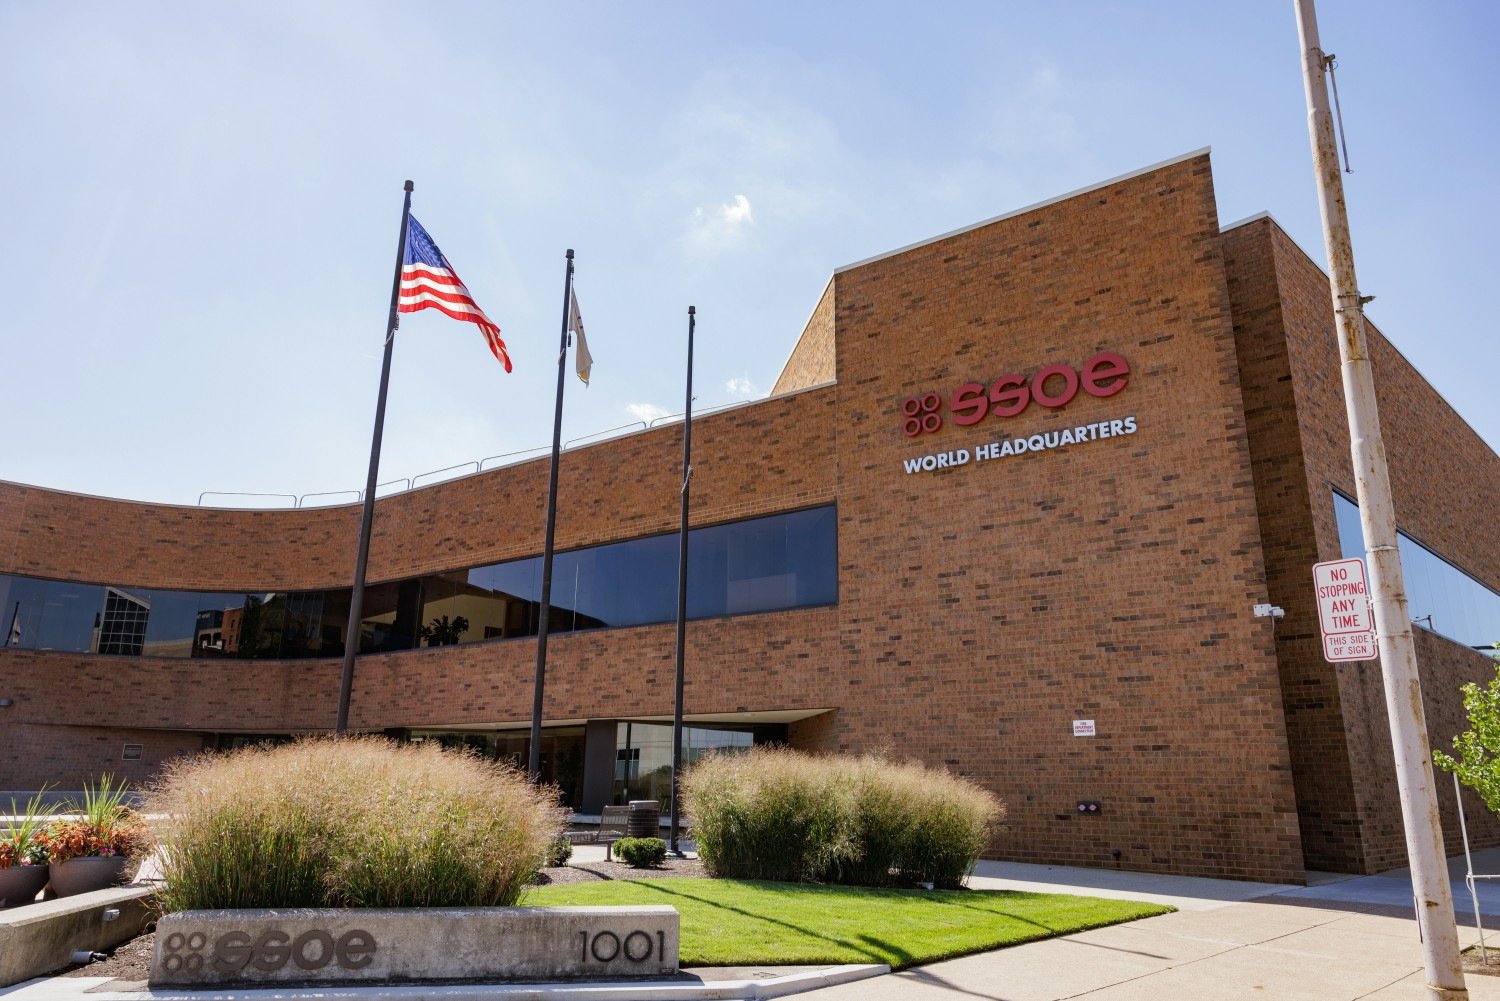 SSOE was founded in Toledo, Ohio in 1948 where our world headquarters resides—today, we have 20 locations.